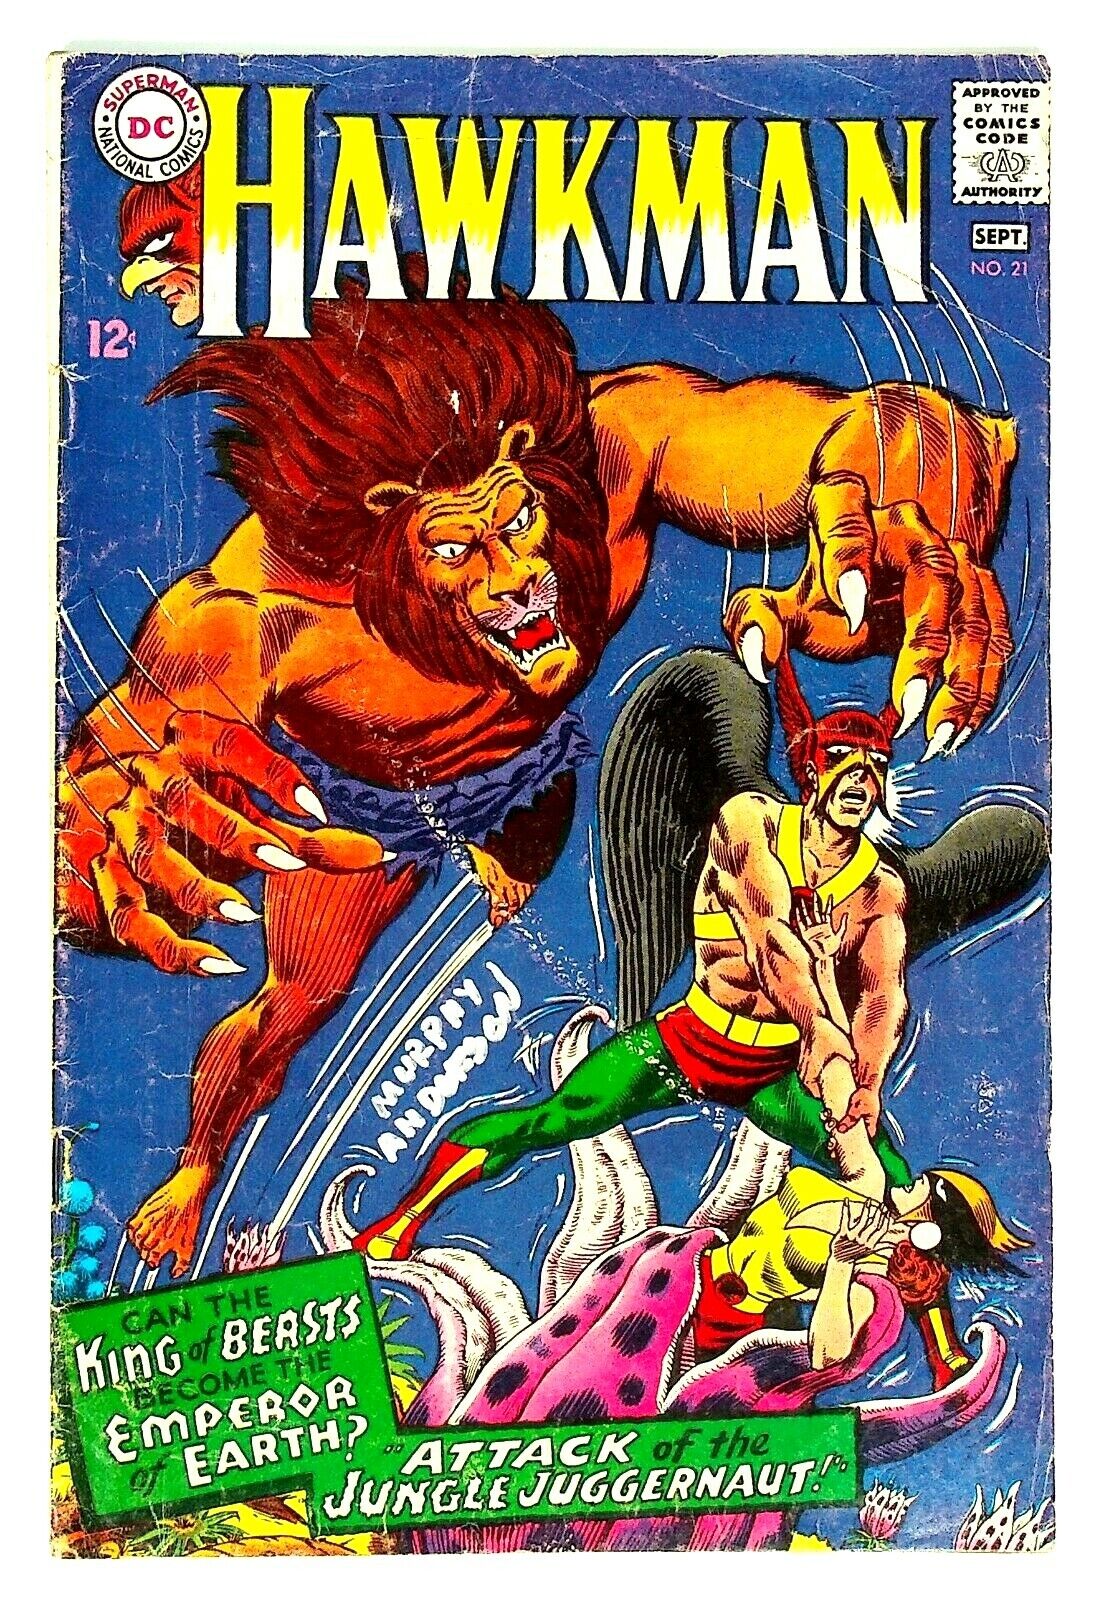 Hawkman #21 Signed by Murphy Anderson DC Comics 1964 Silver Age 